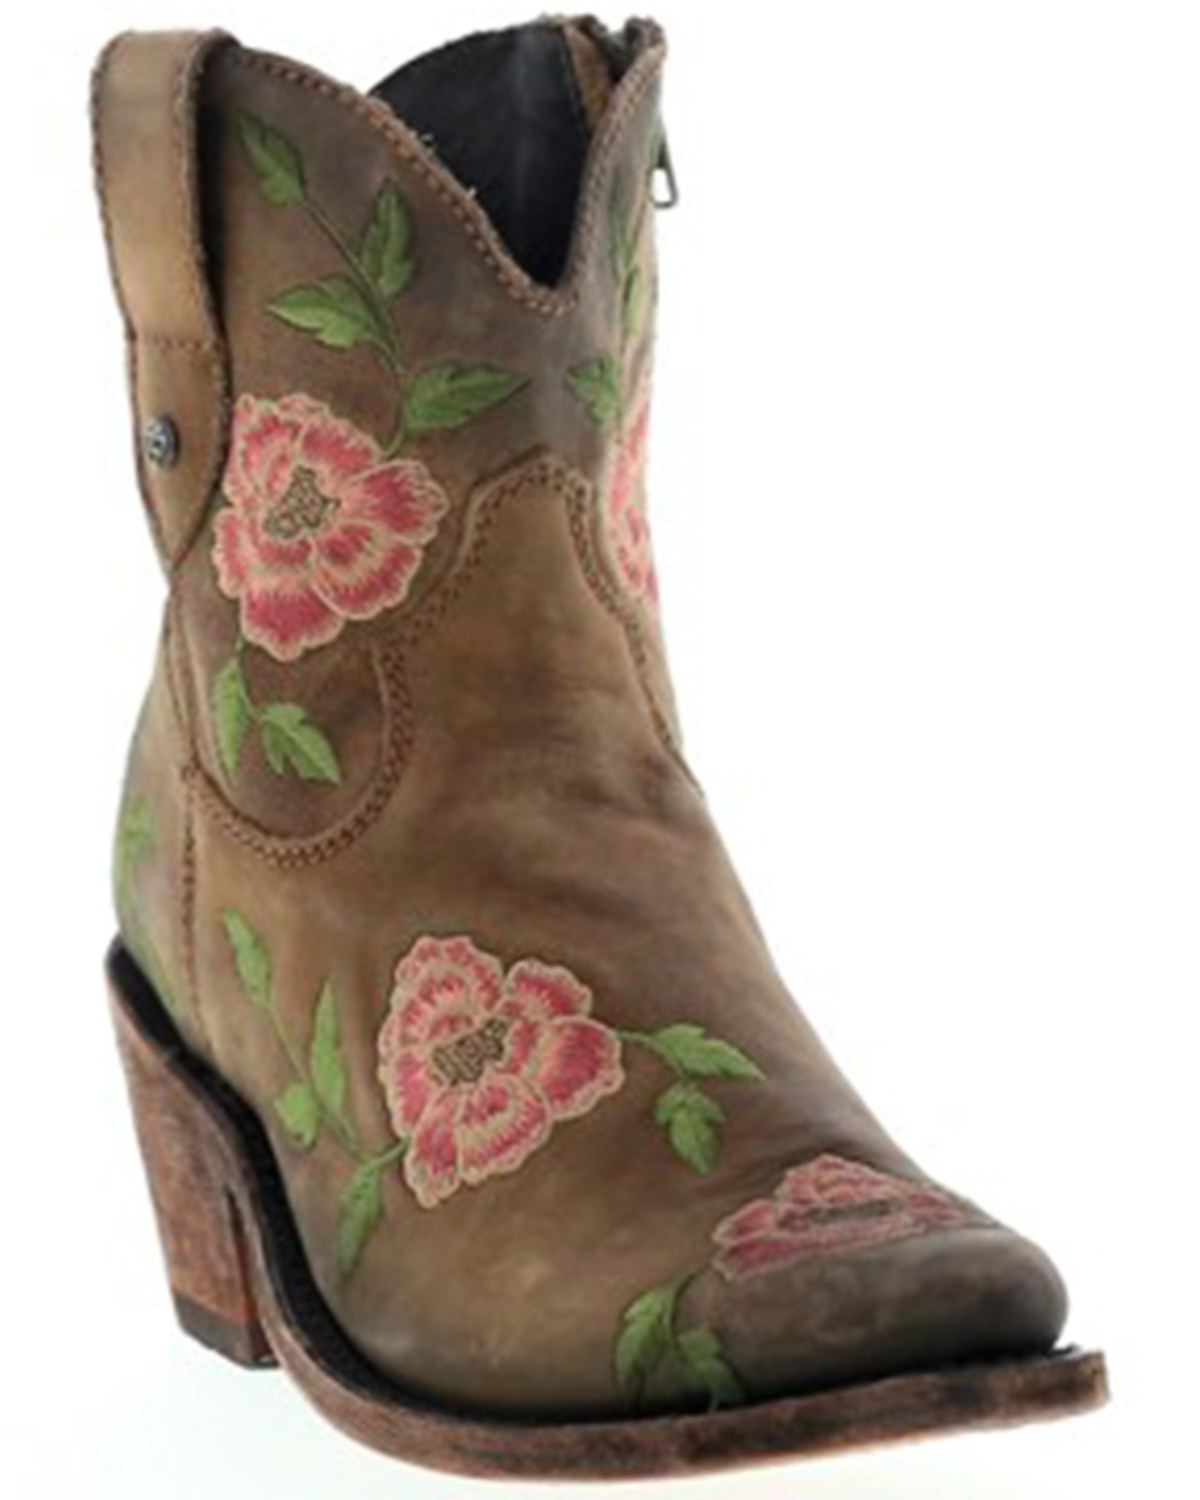 Caborca Silver by Liberty Black Women's Embroidered Floral Western Booties - Pointed Toe